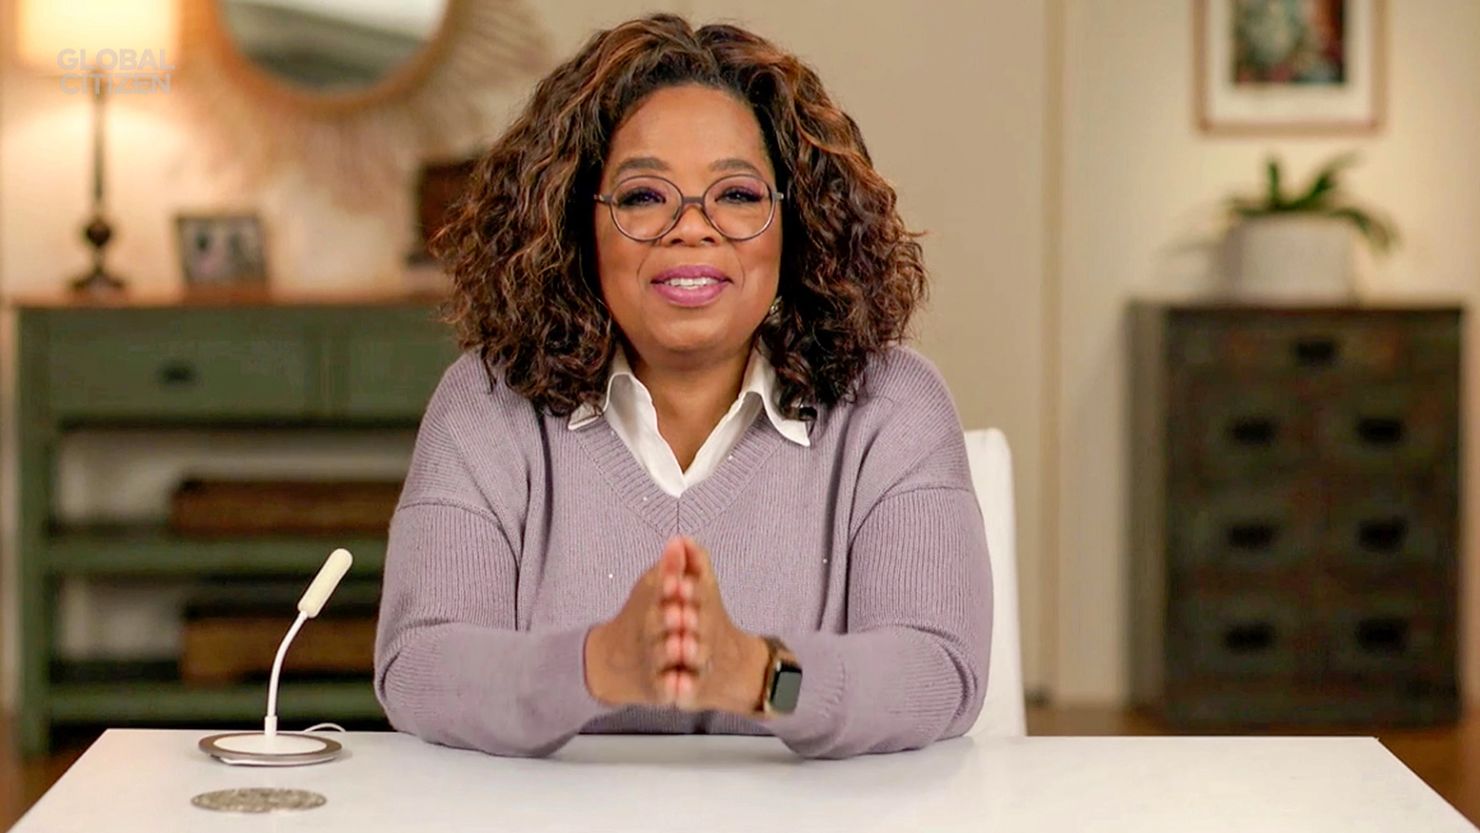 Oprah Winfrey shares her concerns about where we are as a country in an upcoming podcast.